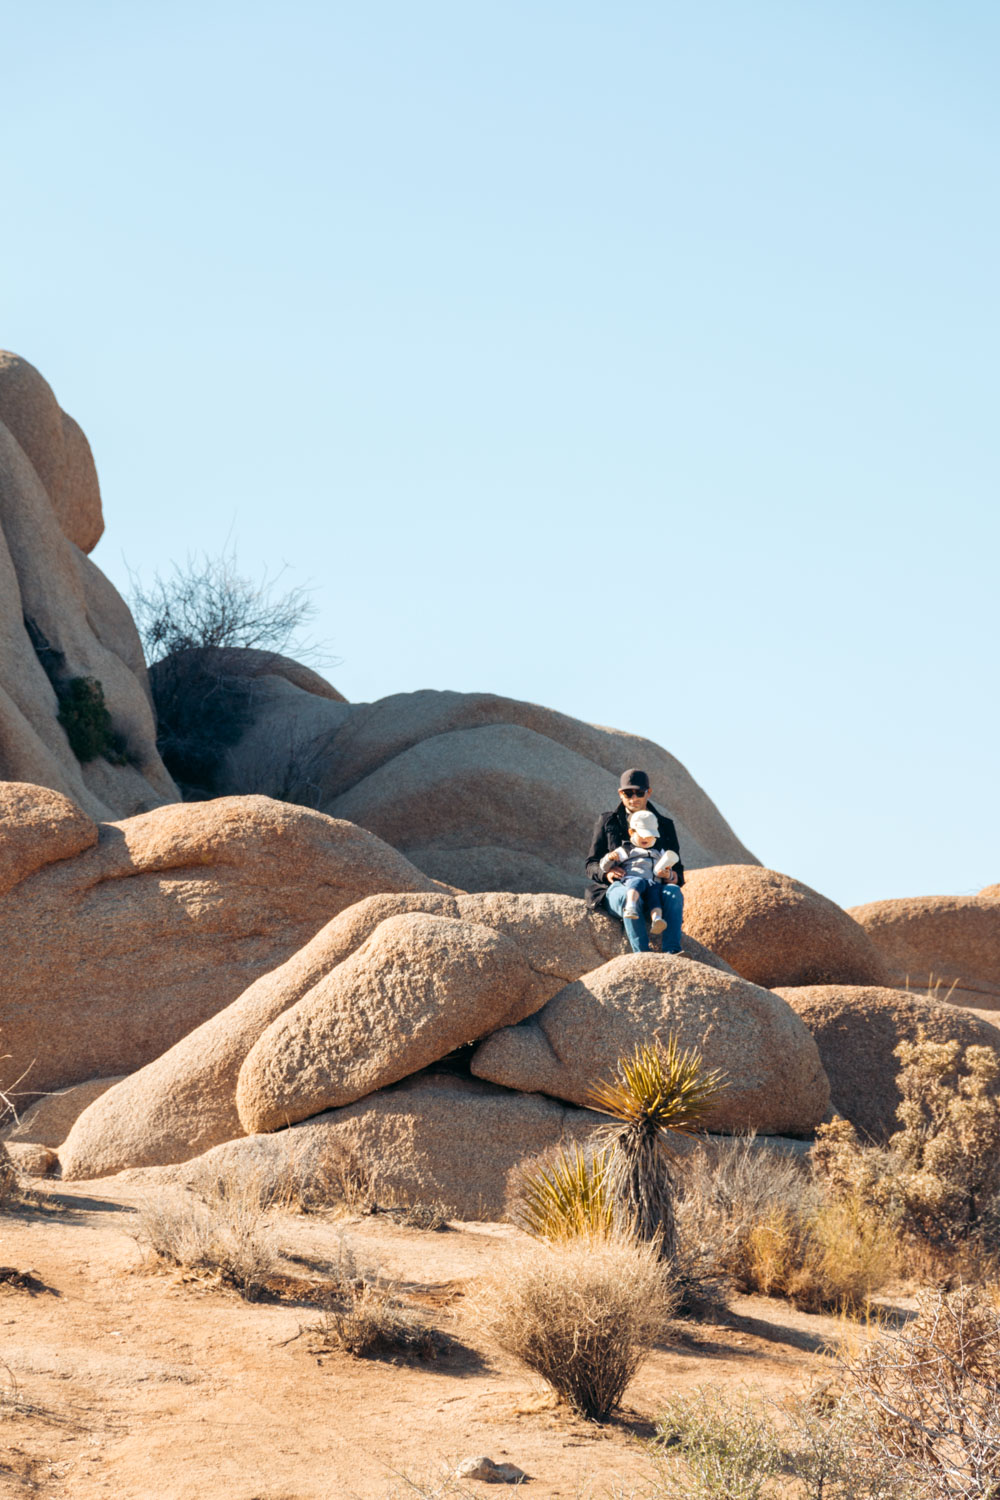 Where to Stay in Joshua Tree National Park - Roads and Destinations